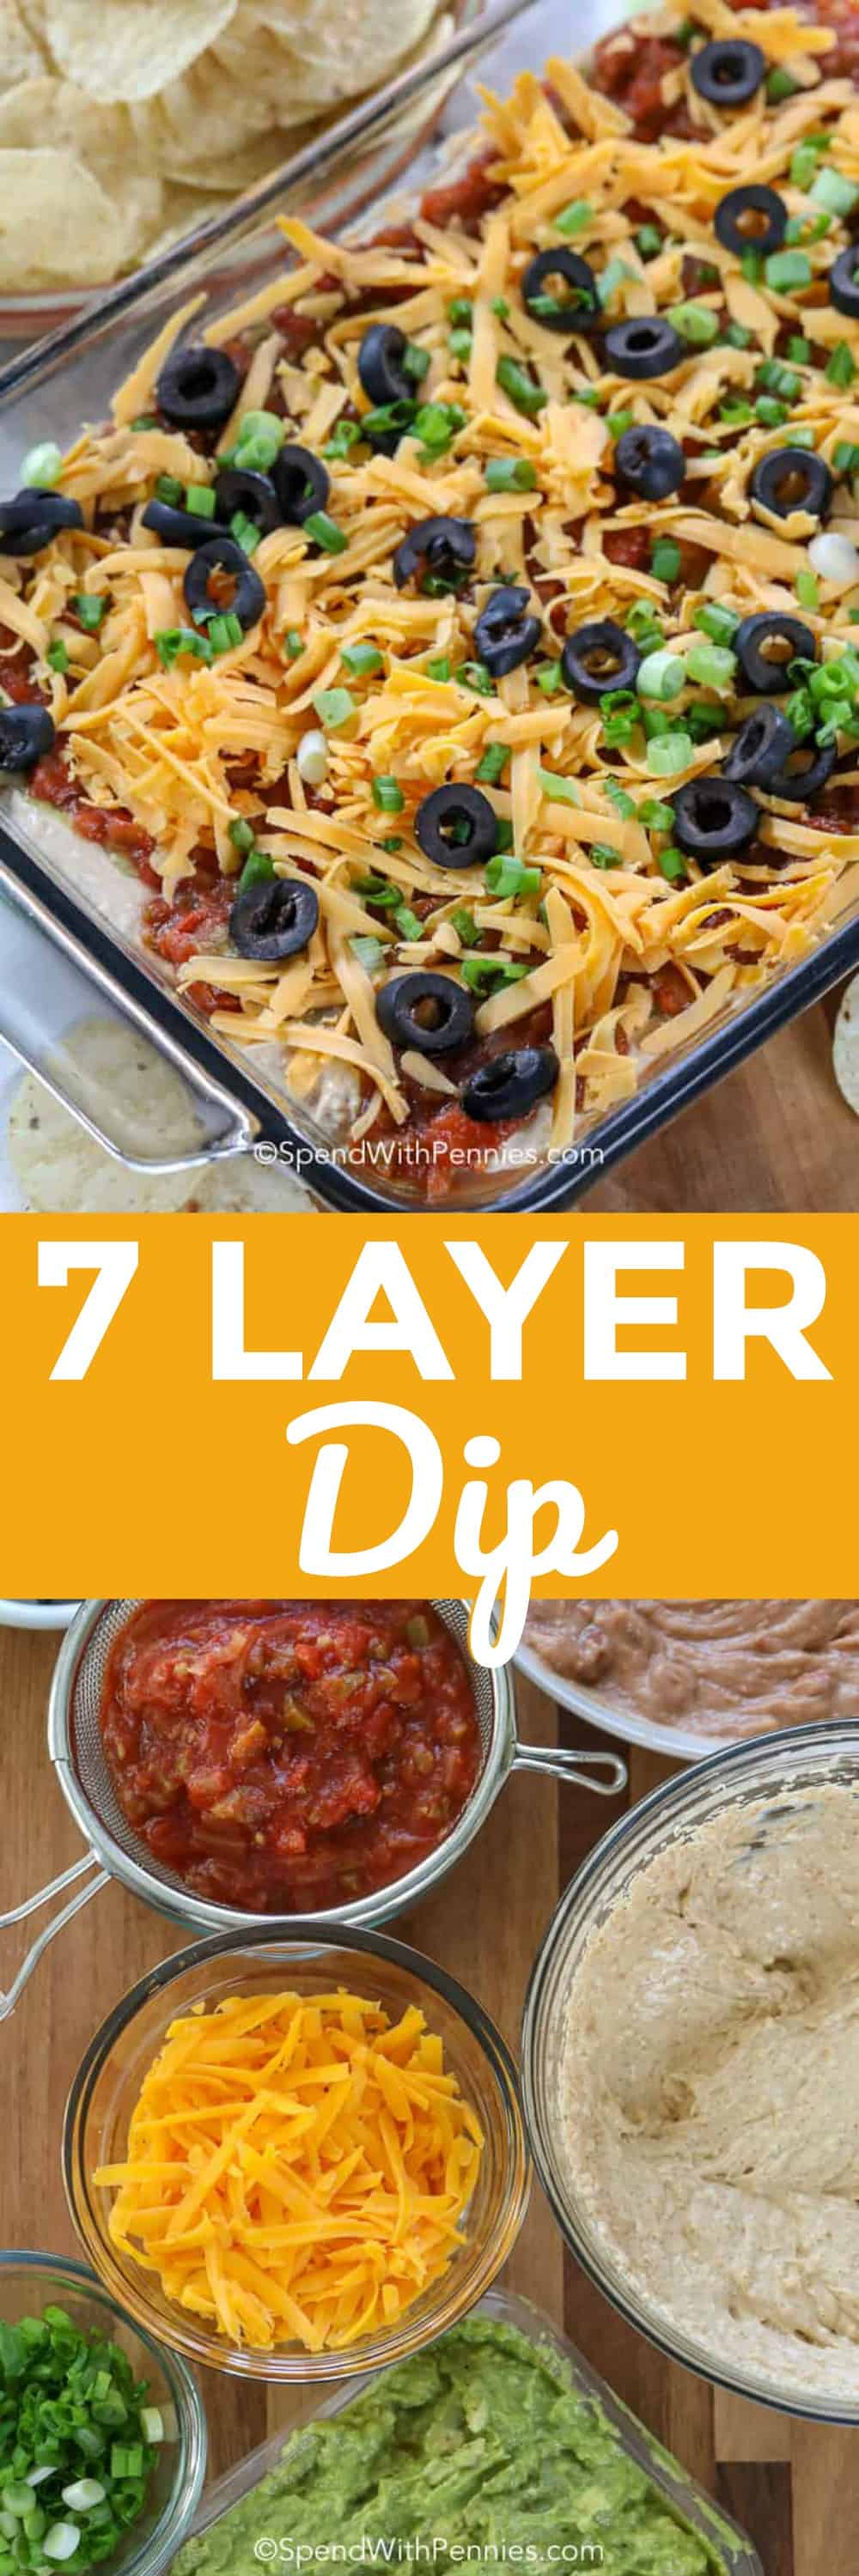 7 layer dip ingredients and 7 layer dip in a casserole dish with a title